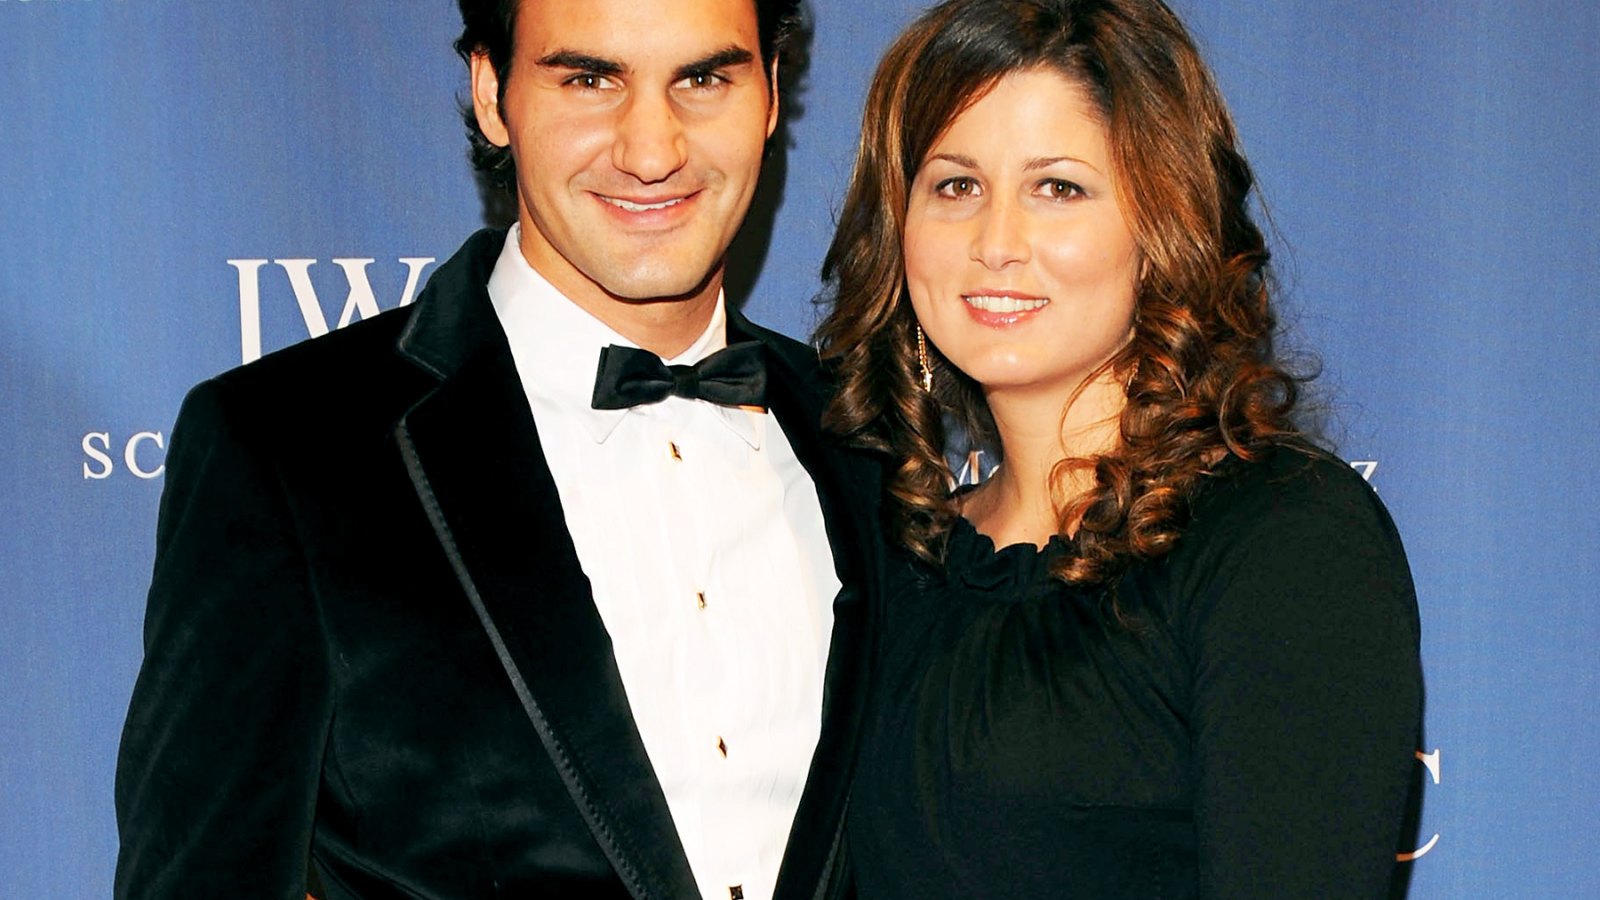 Roger Federer and his wife Mirka Vavrinec welcomed twins again